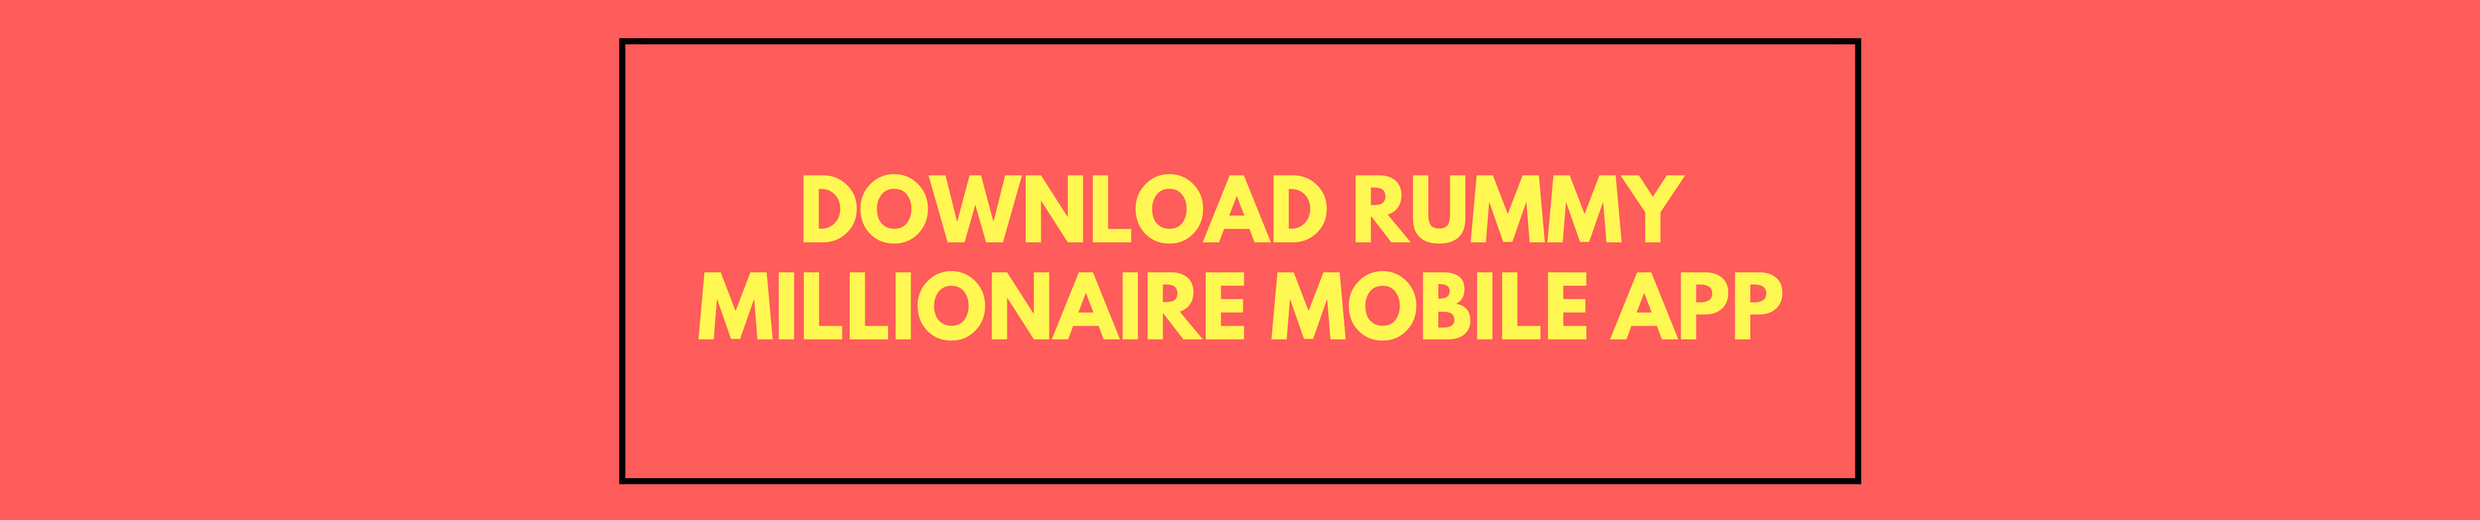 mobile rummy